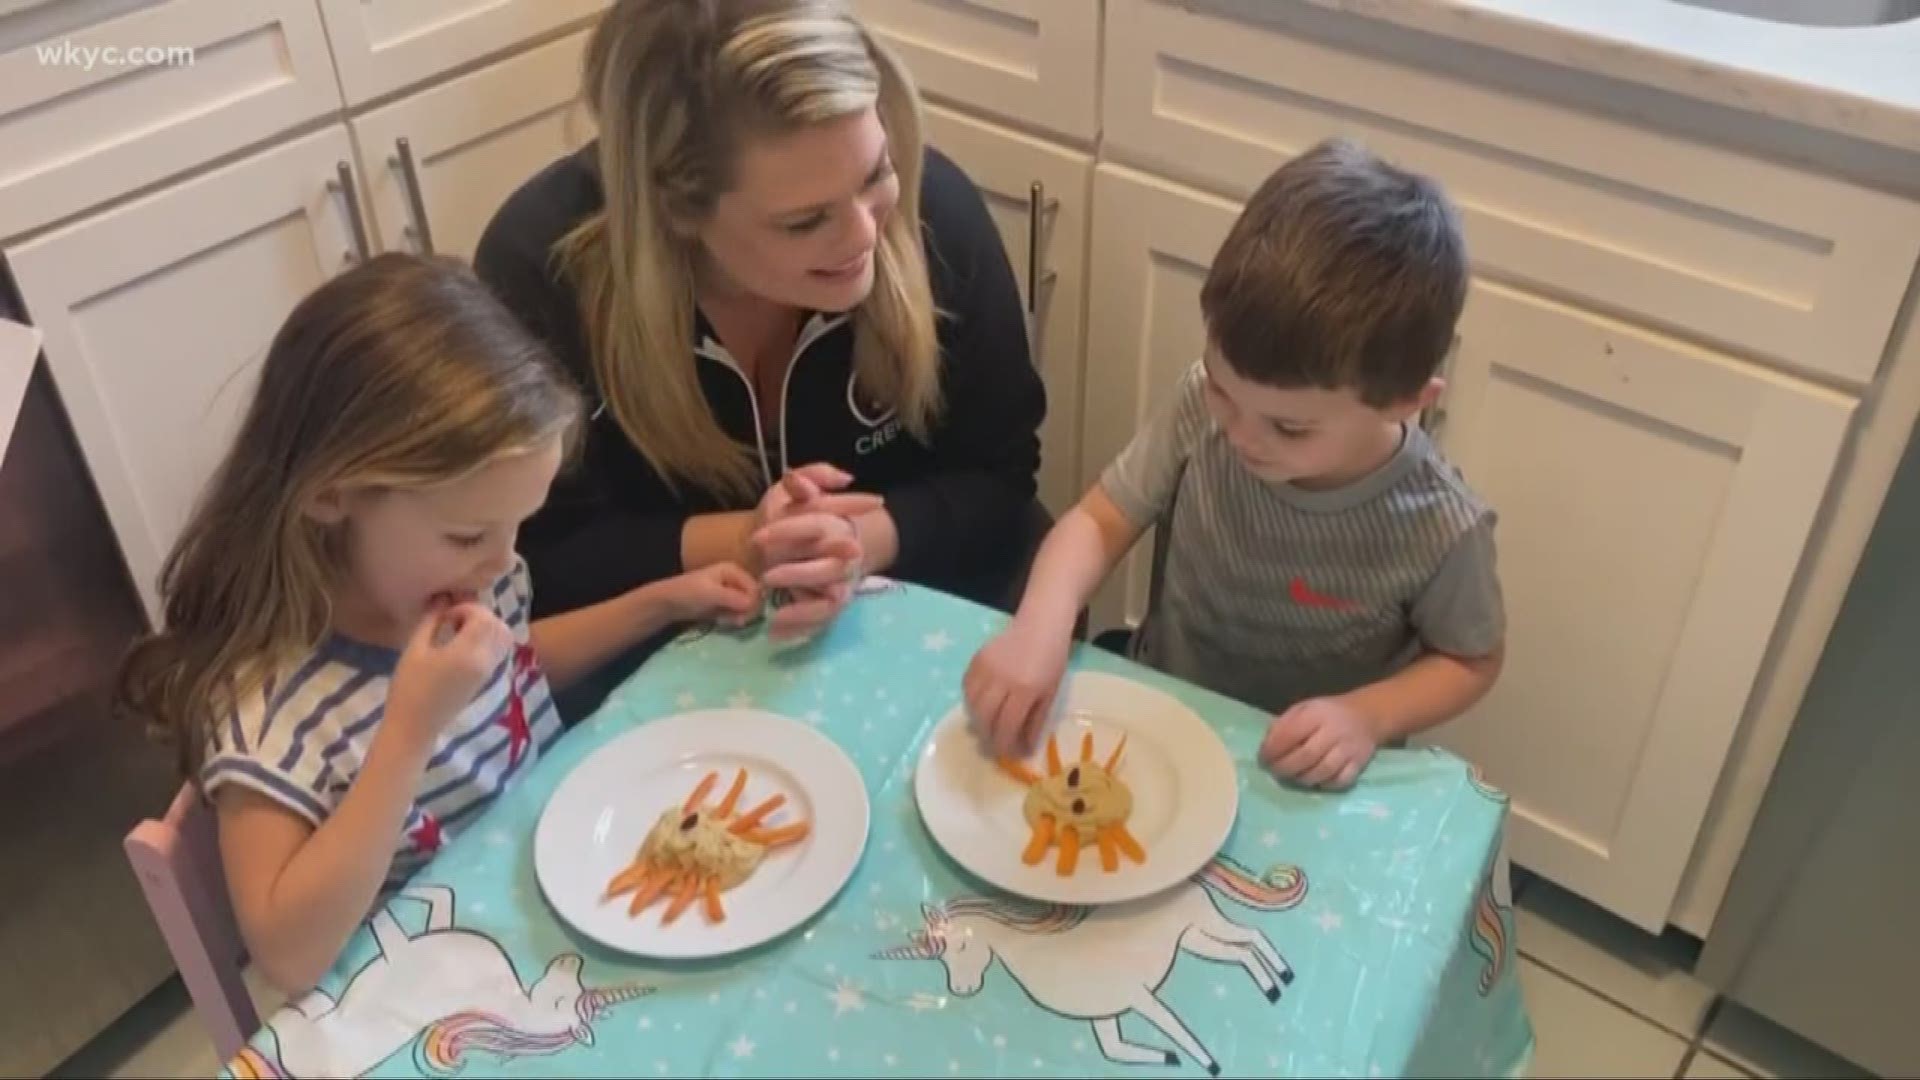 If you're among the majority of parents, your kiddos might be asking for a lot of snacks during their days at home. So, we tapped a local chef for some fresh ideas.